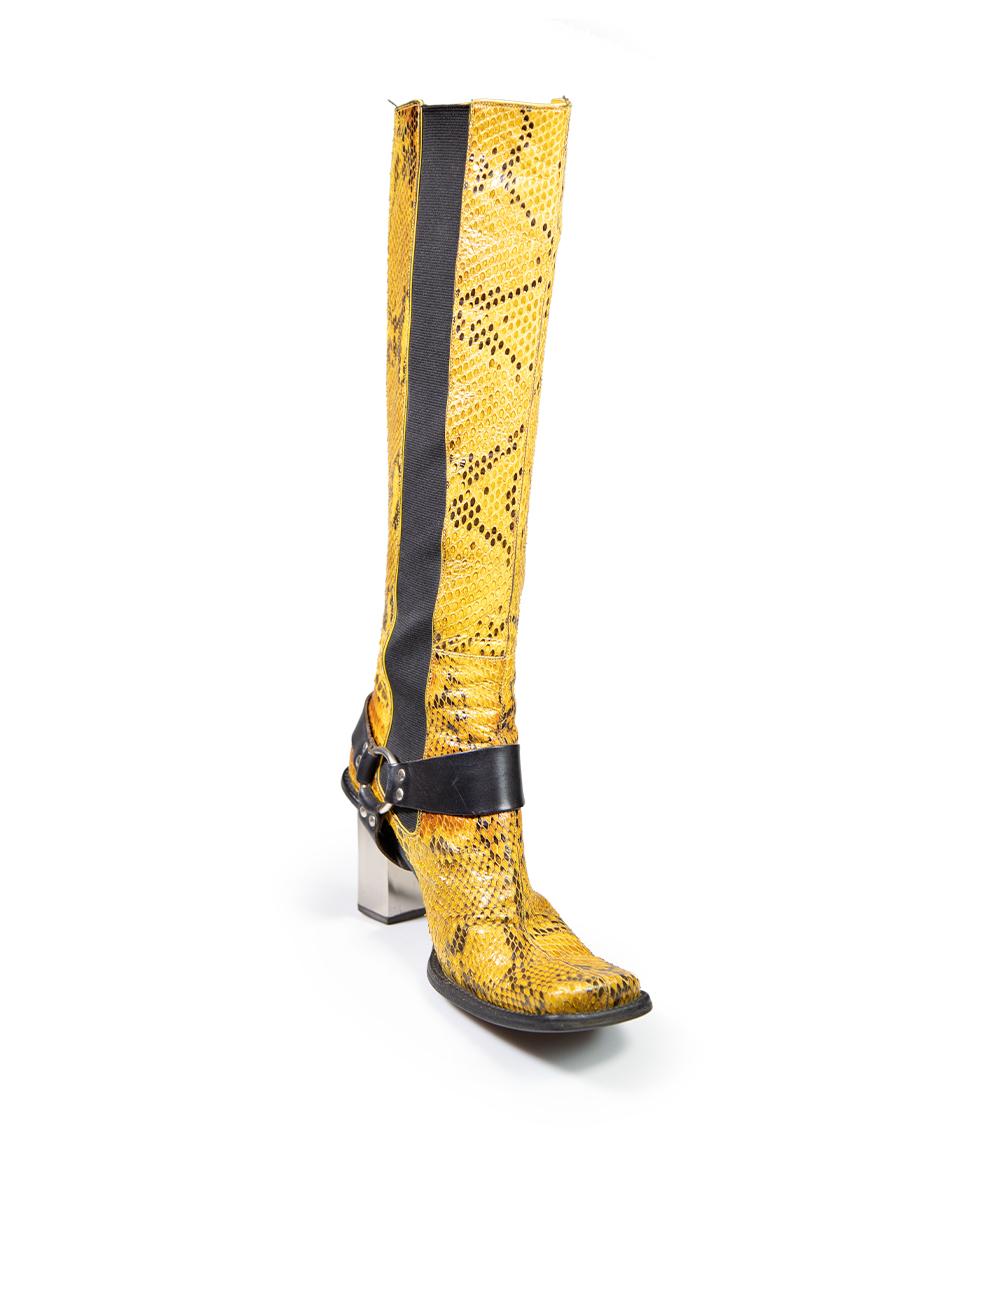 CONDITION is Very good. Minimal wear to boots is evident. Minimal scratch marks on both heels and pilling to overall material on both shoes on this used Dolce & Gabbana designer resale item.
 
 
 
 Details
 
 
 Yellow
 
 Python
 
 Boots
 
 Knee